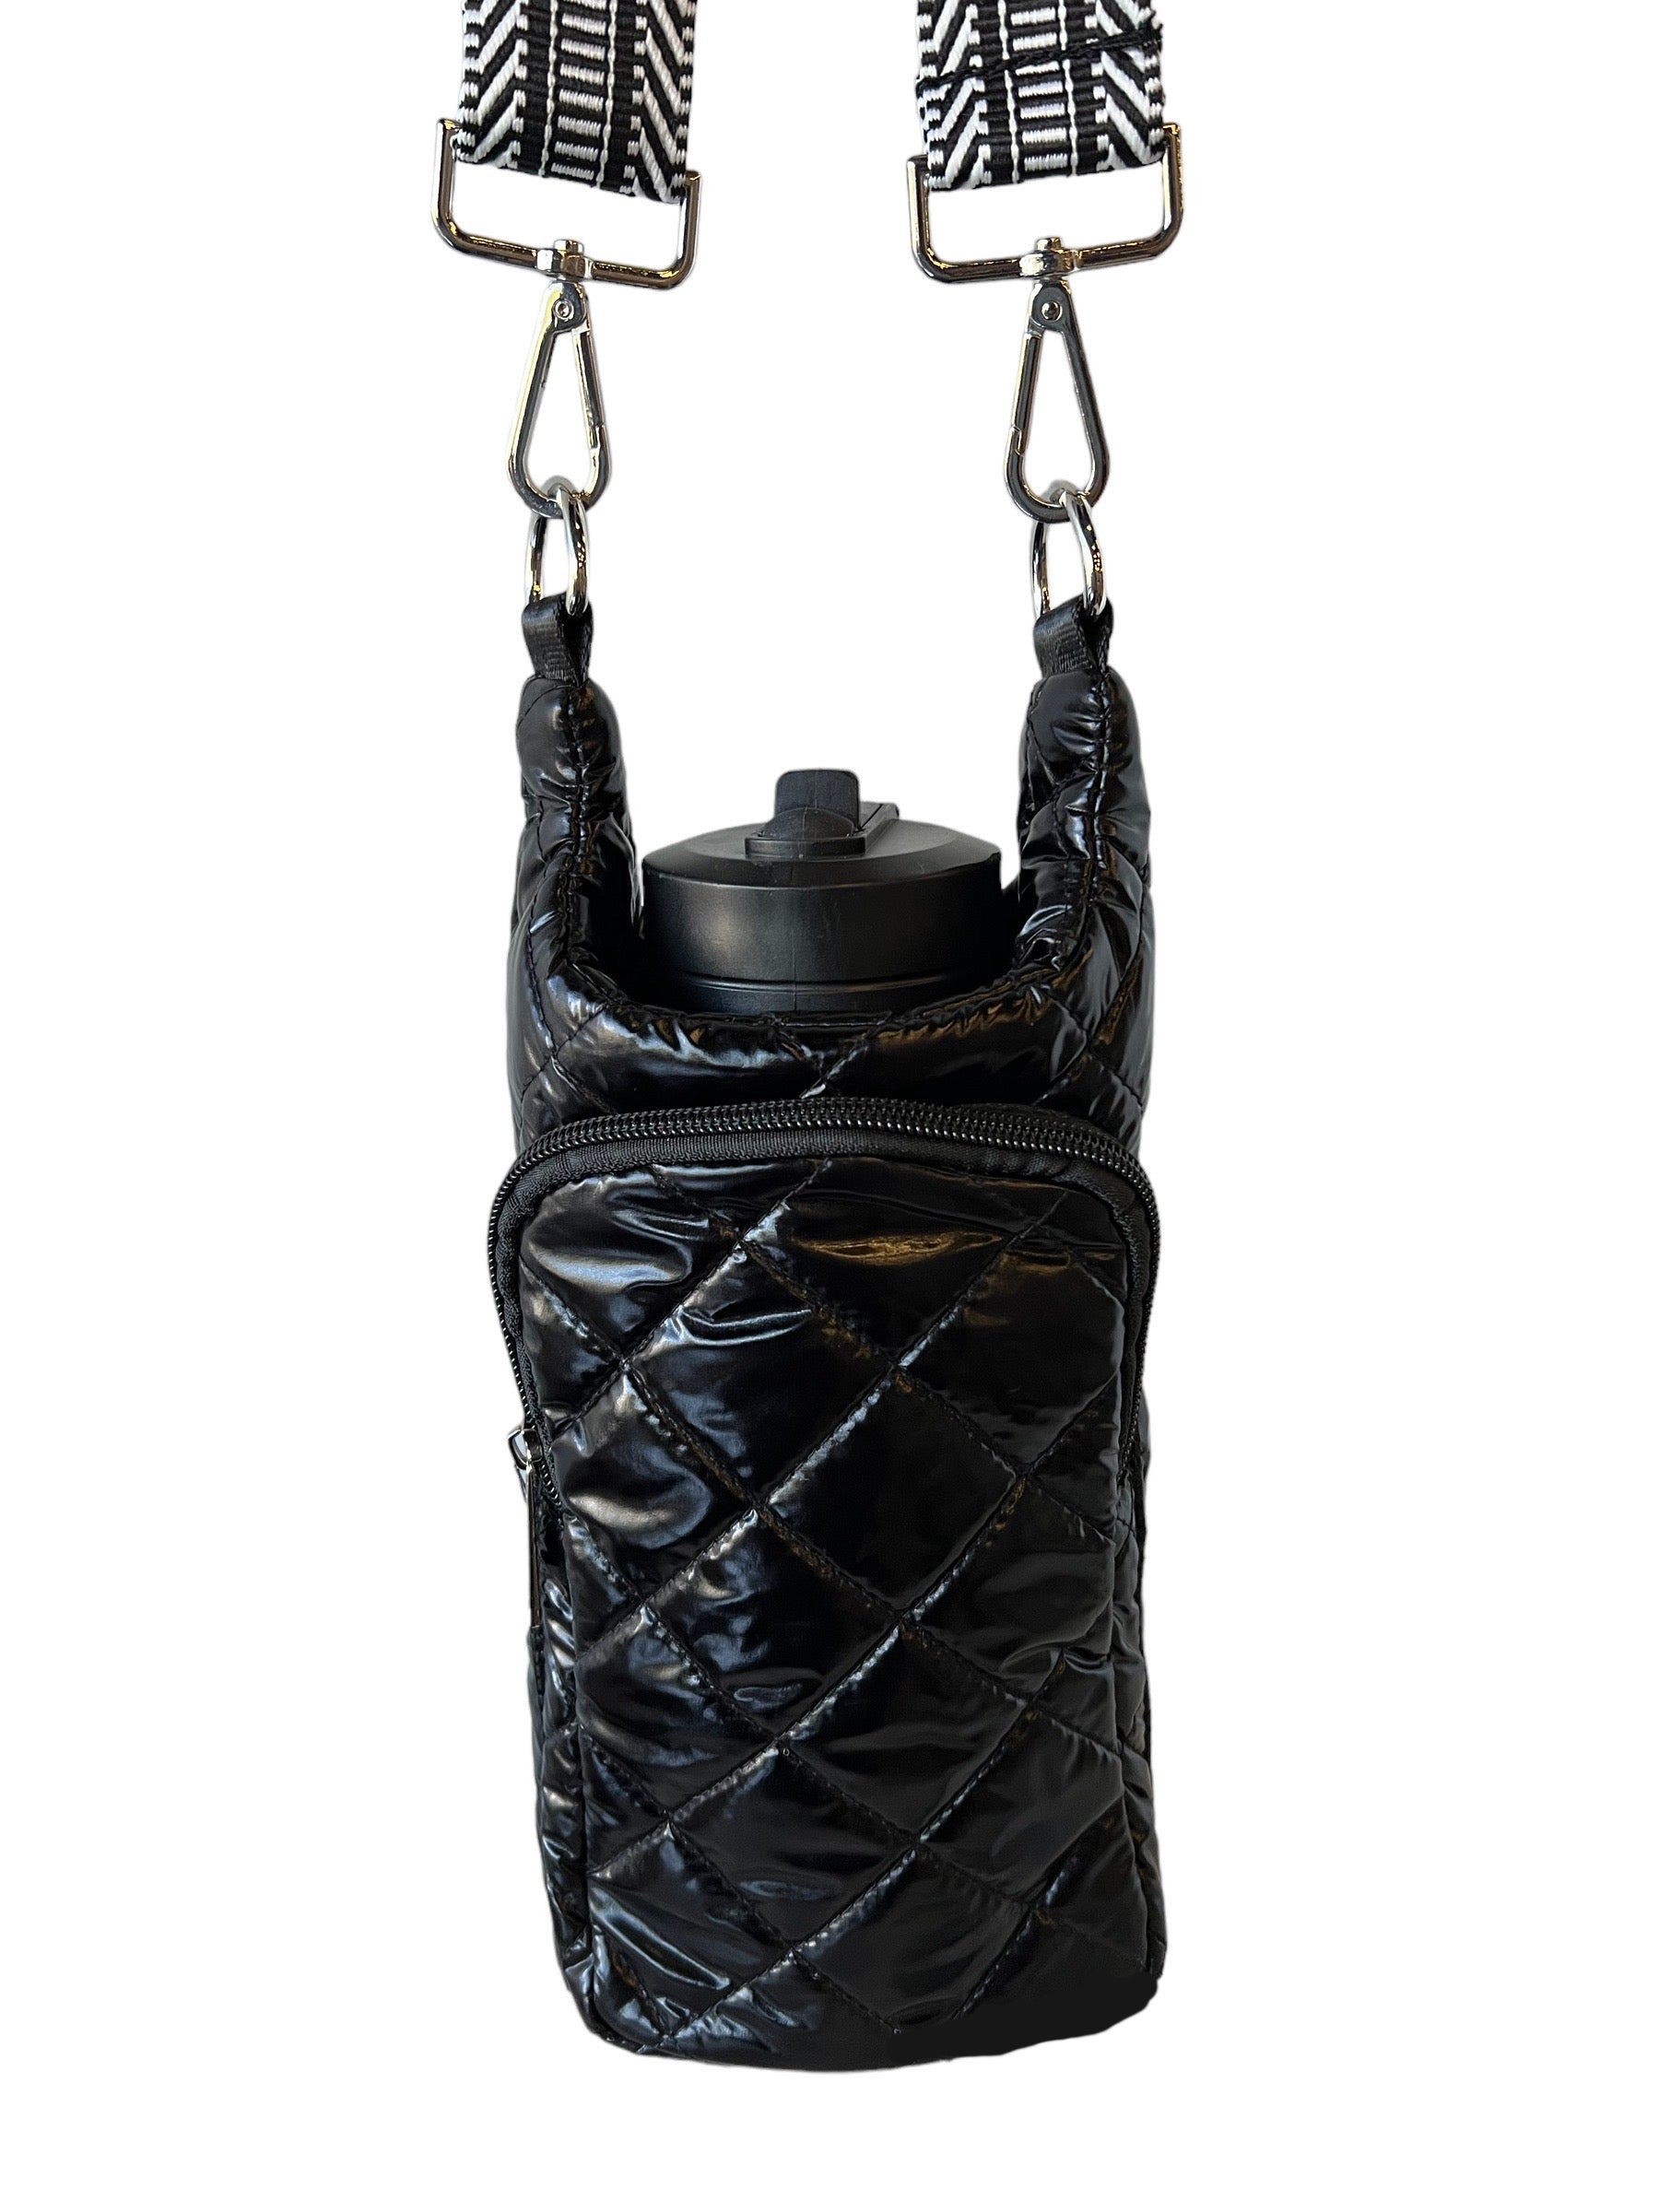 Chanel, black quilted leather bottle holder with its gol… | Drouot.com